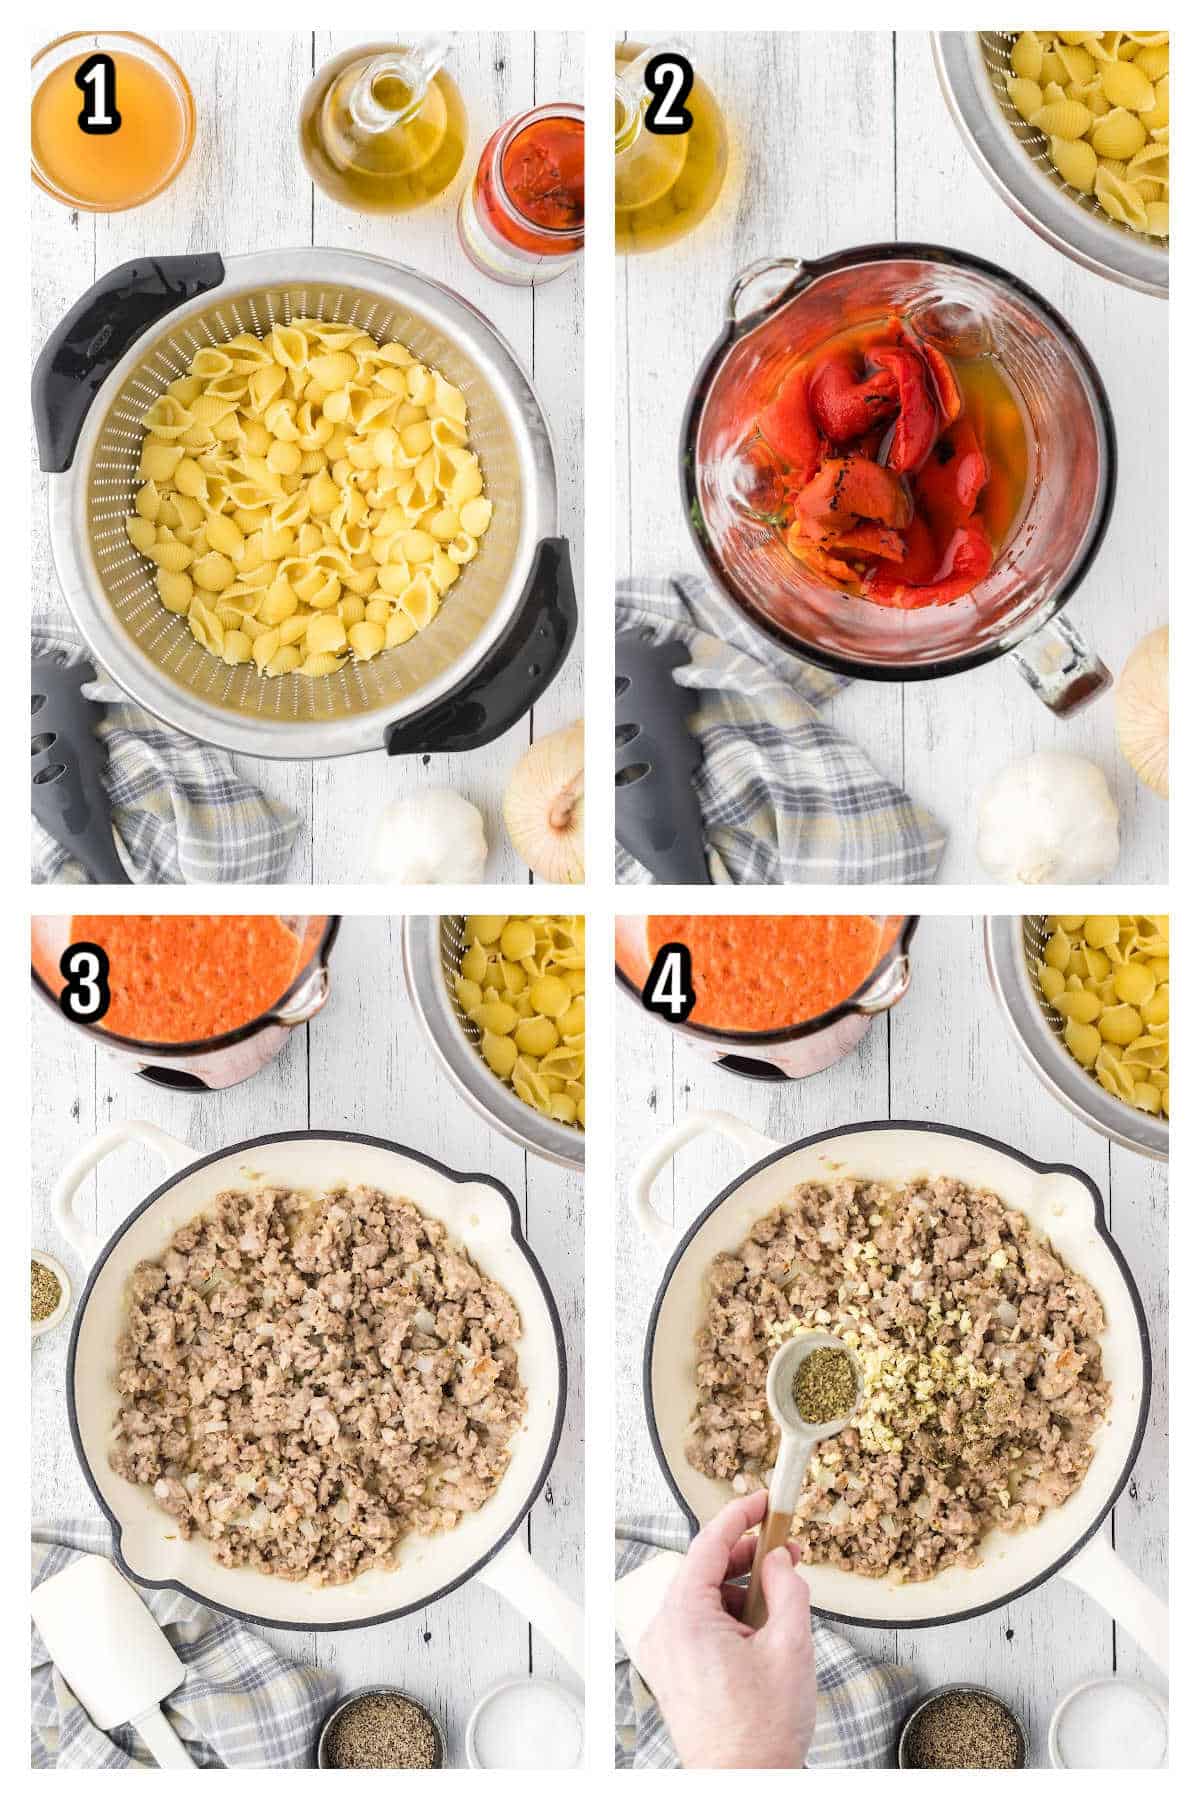 The first four steps to making the shell pasta recipe with roasted red pepper sauce. 